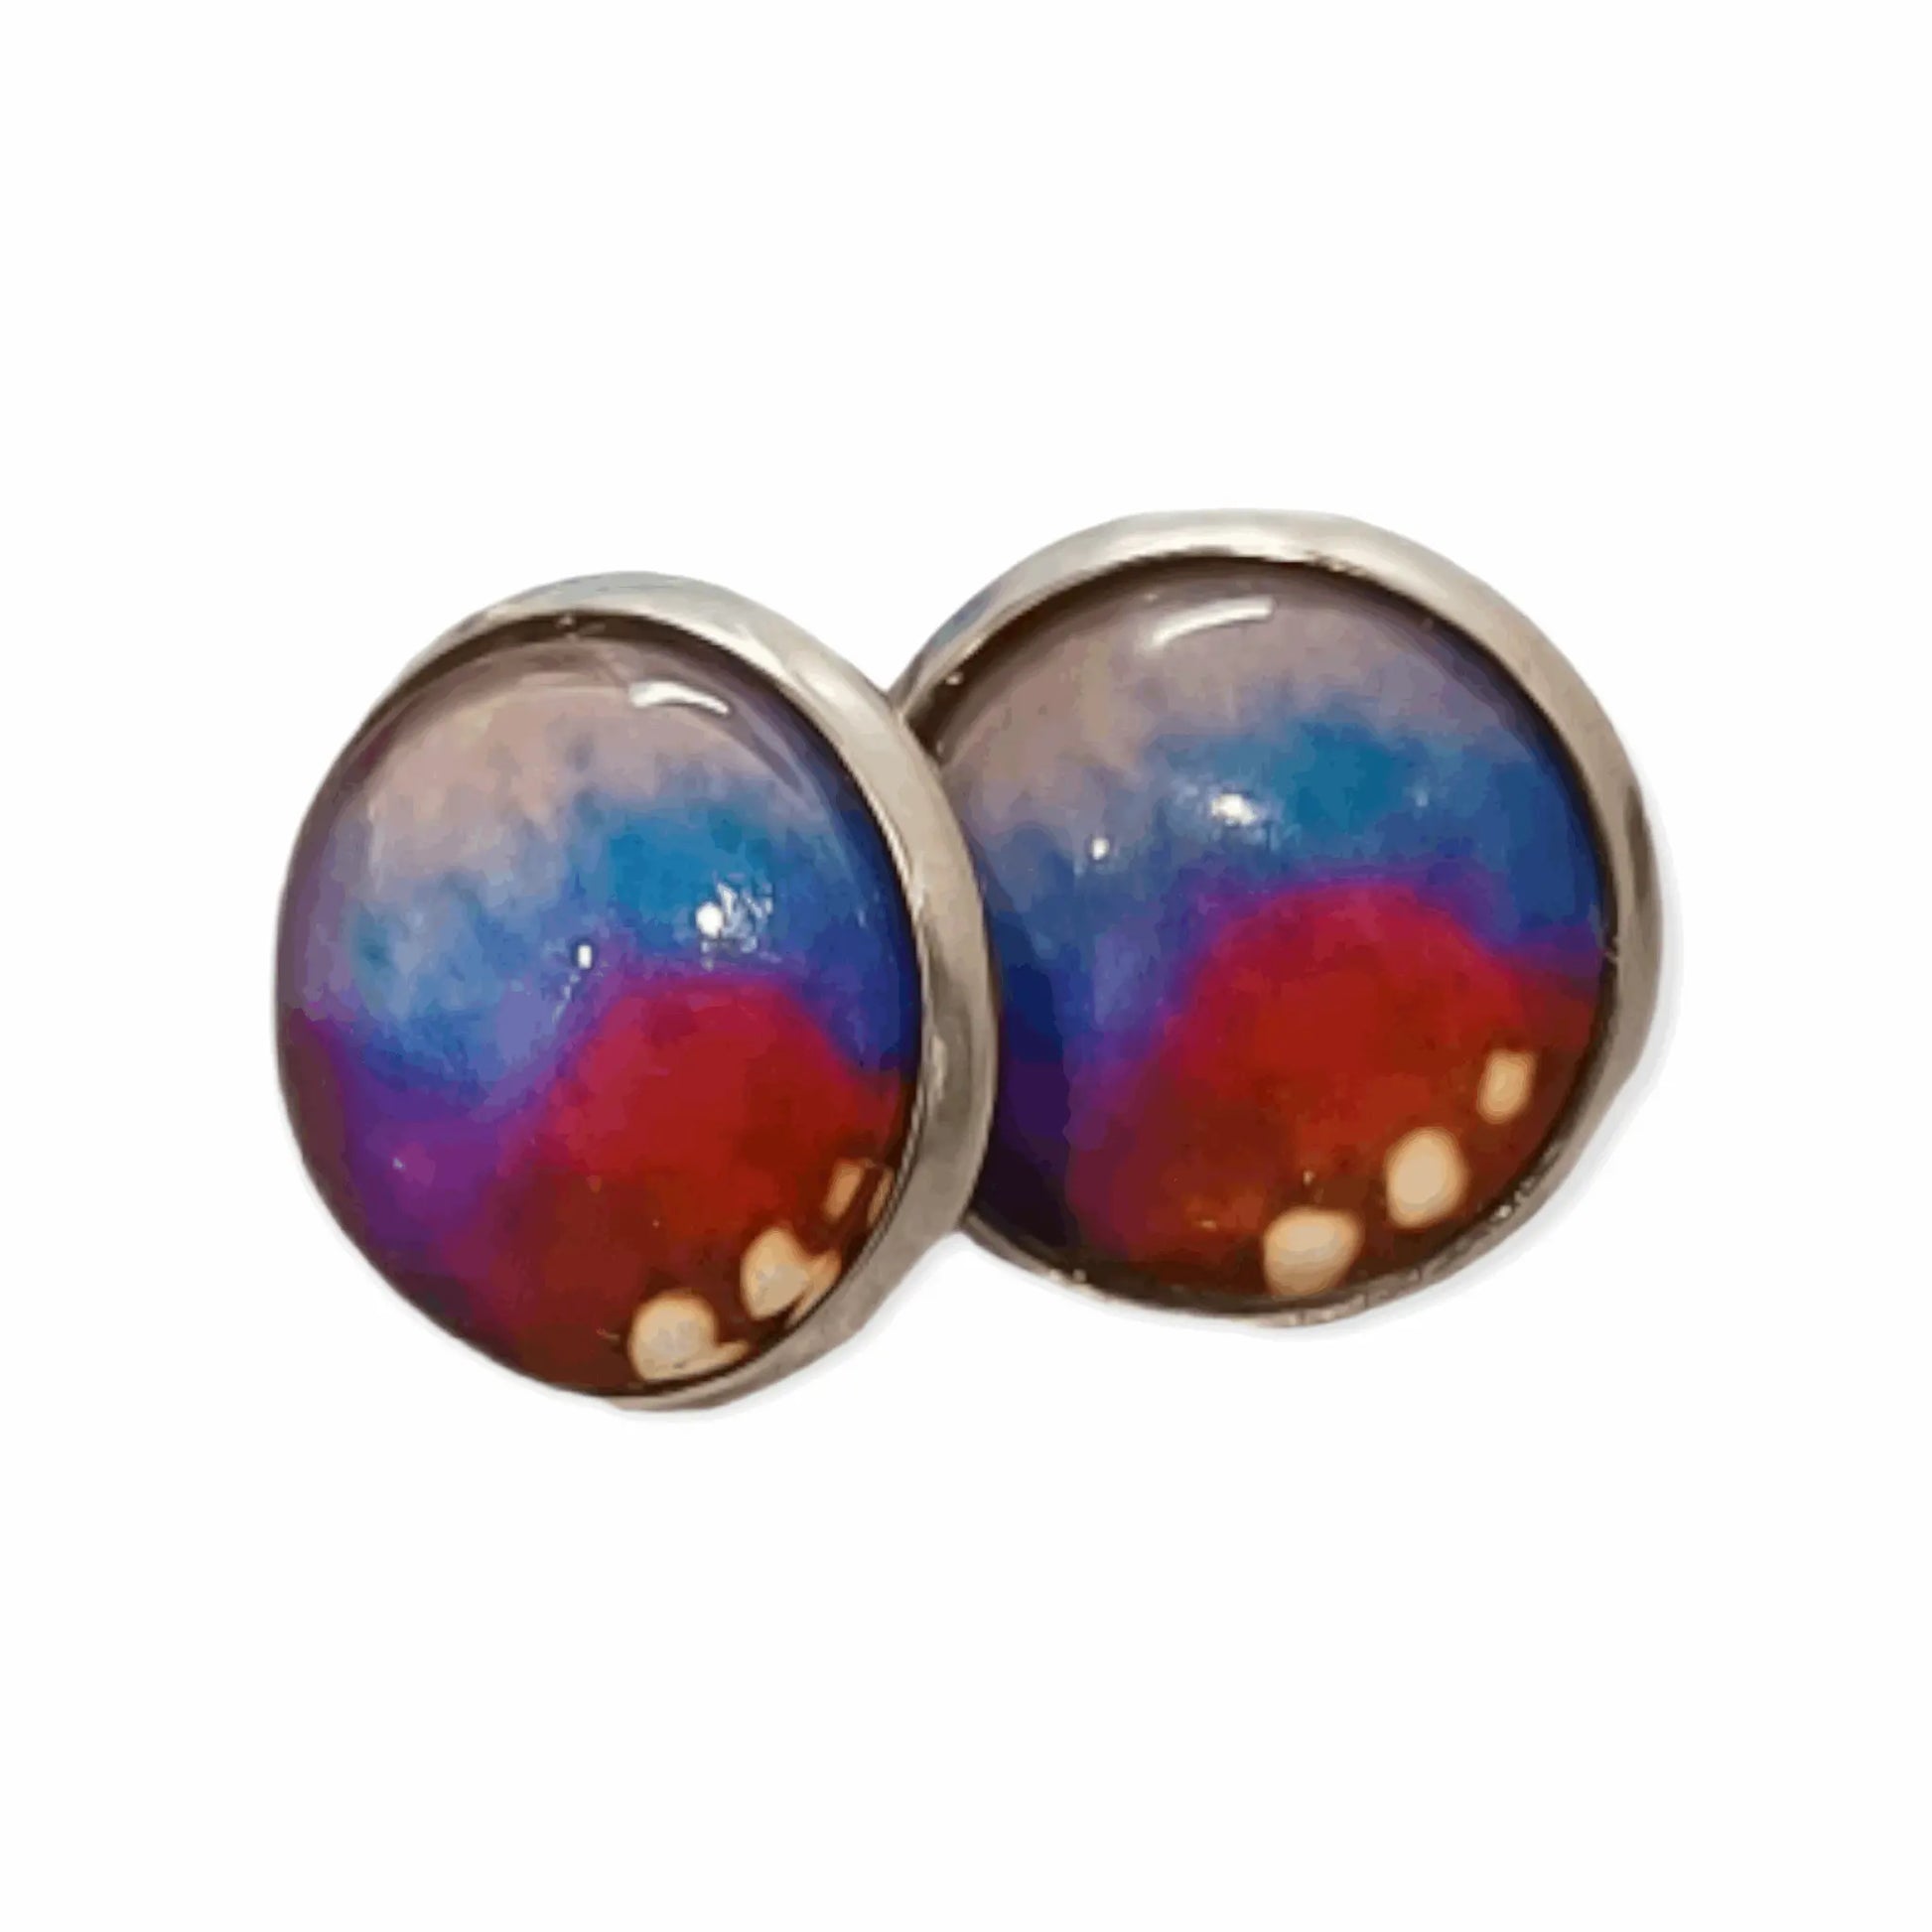 Rainbow Smudges #1 12mm Cabochon stud earrings - Lil-aiges Creations - Quality Australian-made Gifts